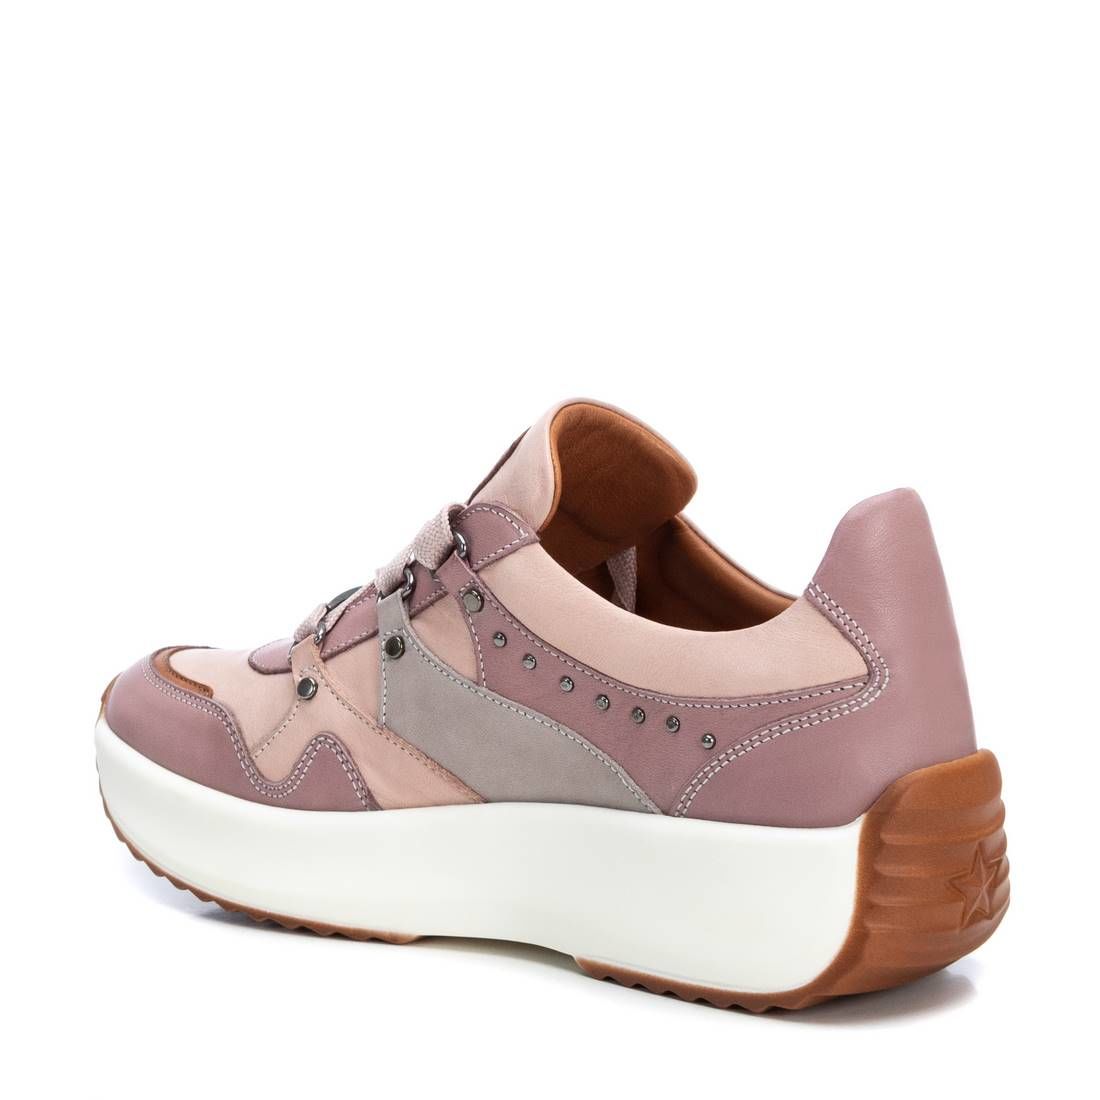 Carmela Womens Leather Fashion Trainers - Nude - The Foot Factory